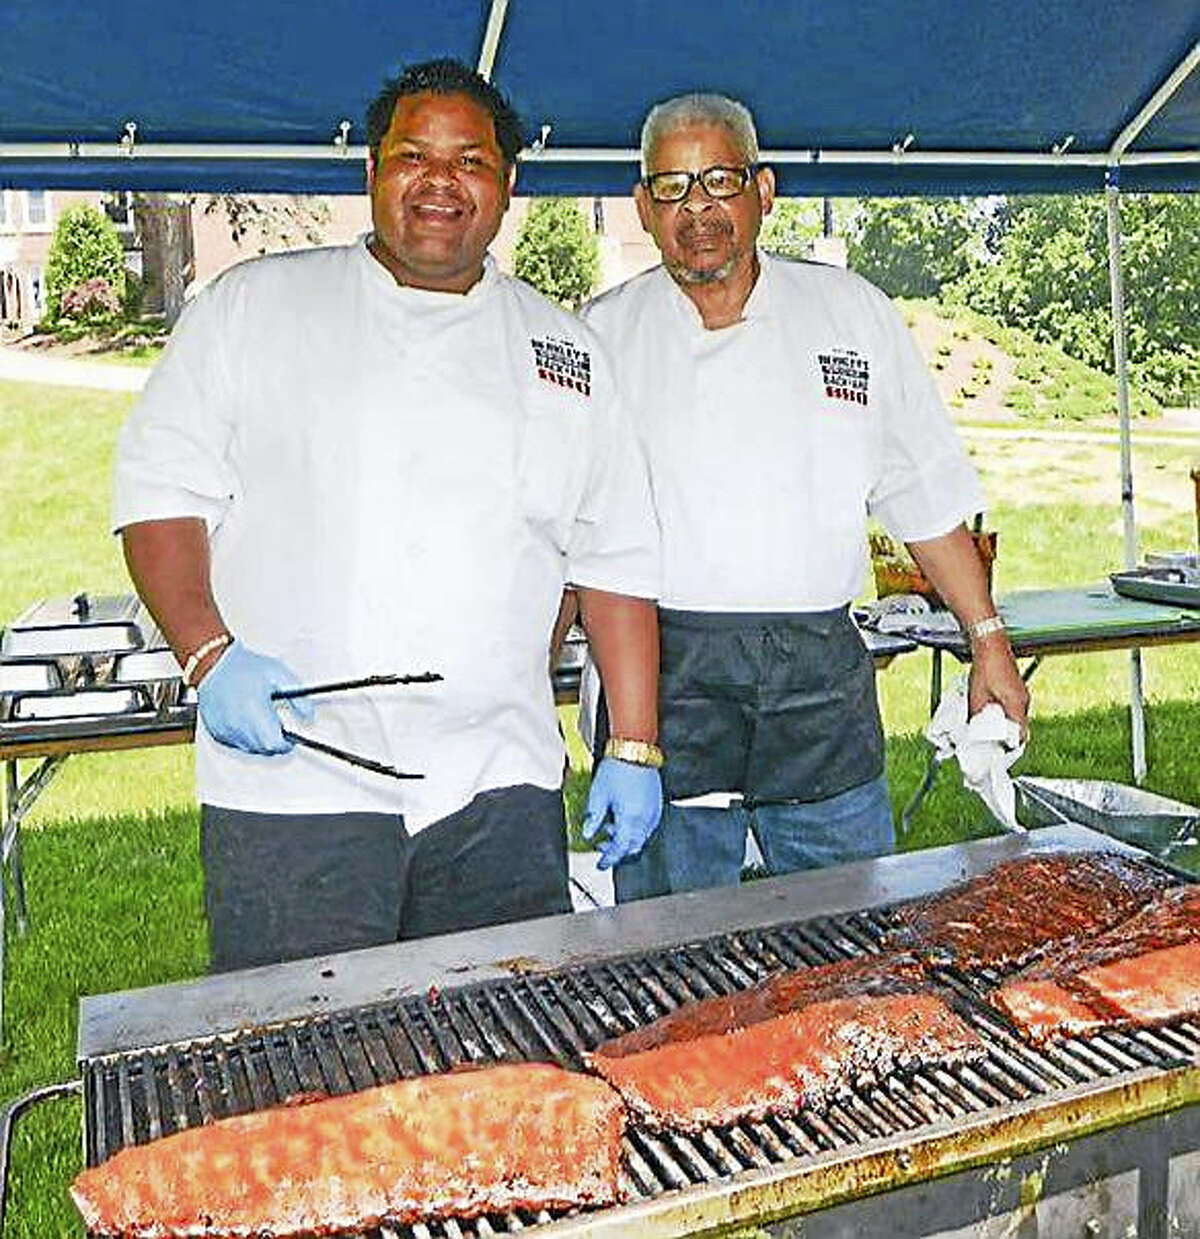 Raymond and Berkley Hoagland work the grill at a barbecue at Cushing Academy in Massachusetts, where Berkley Hoagland went to prep school. They cooked for the crowds at the annual alumni association gathering last weekend.